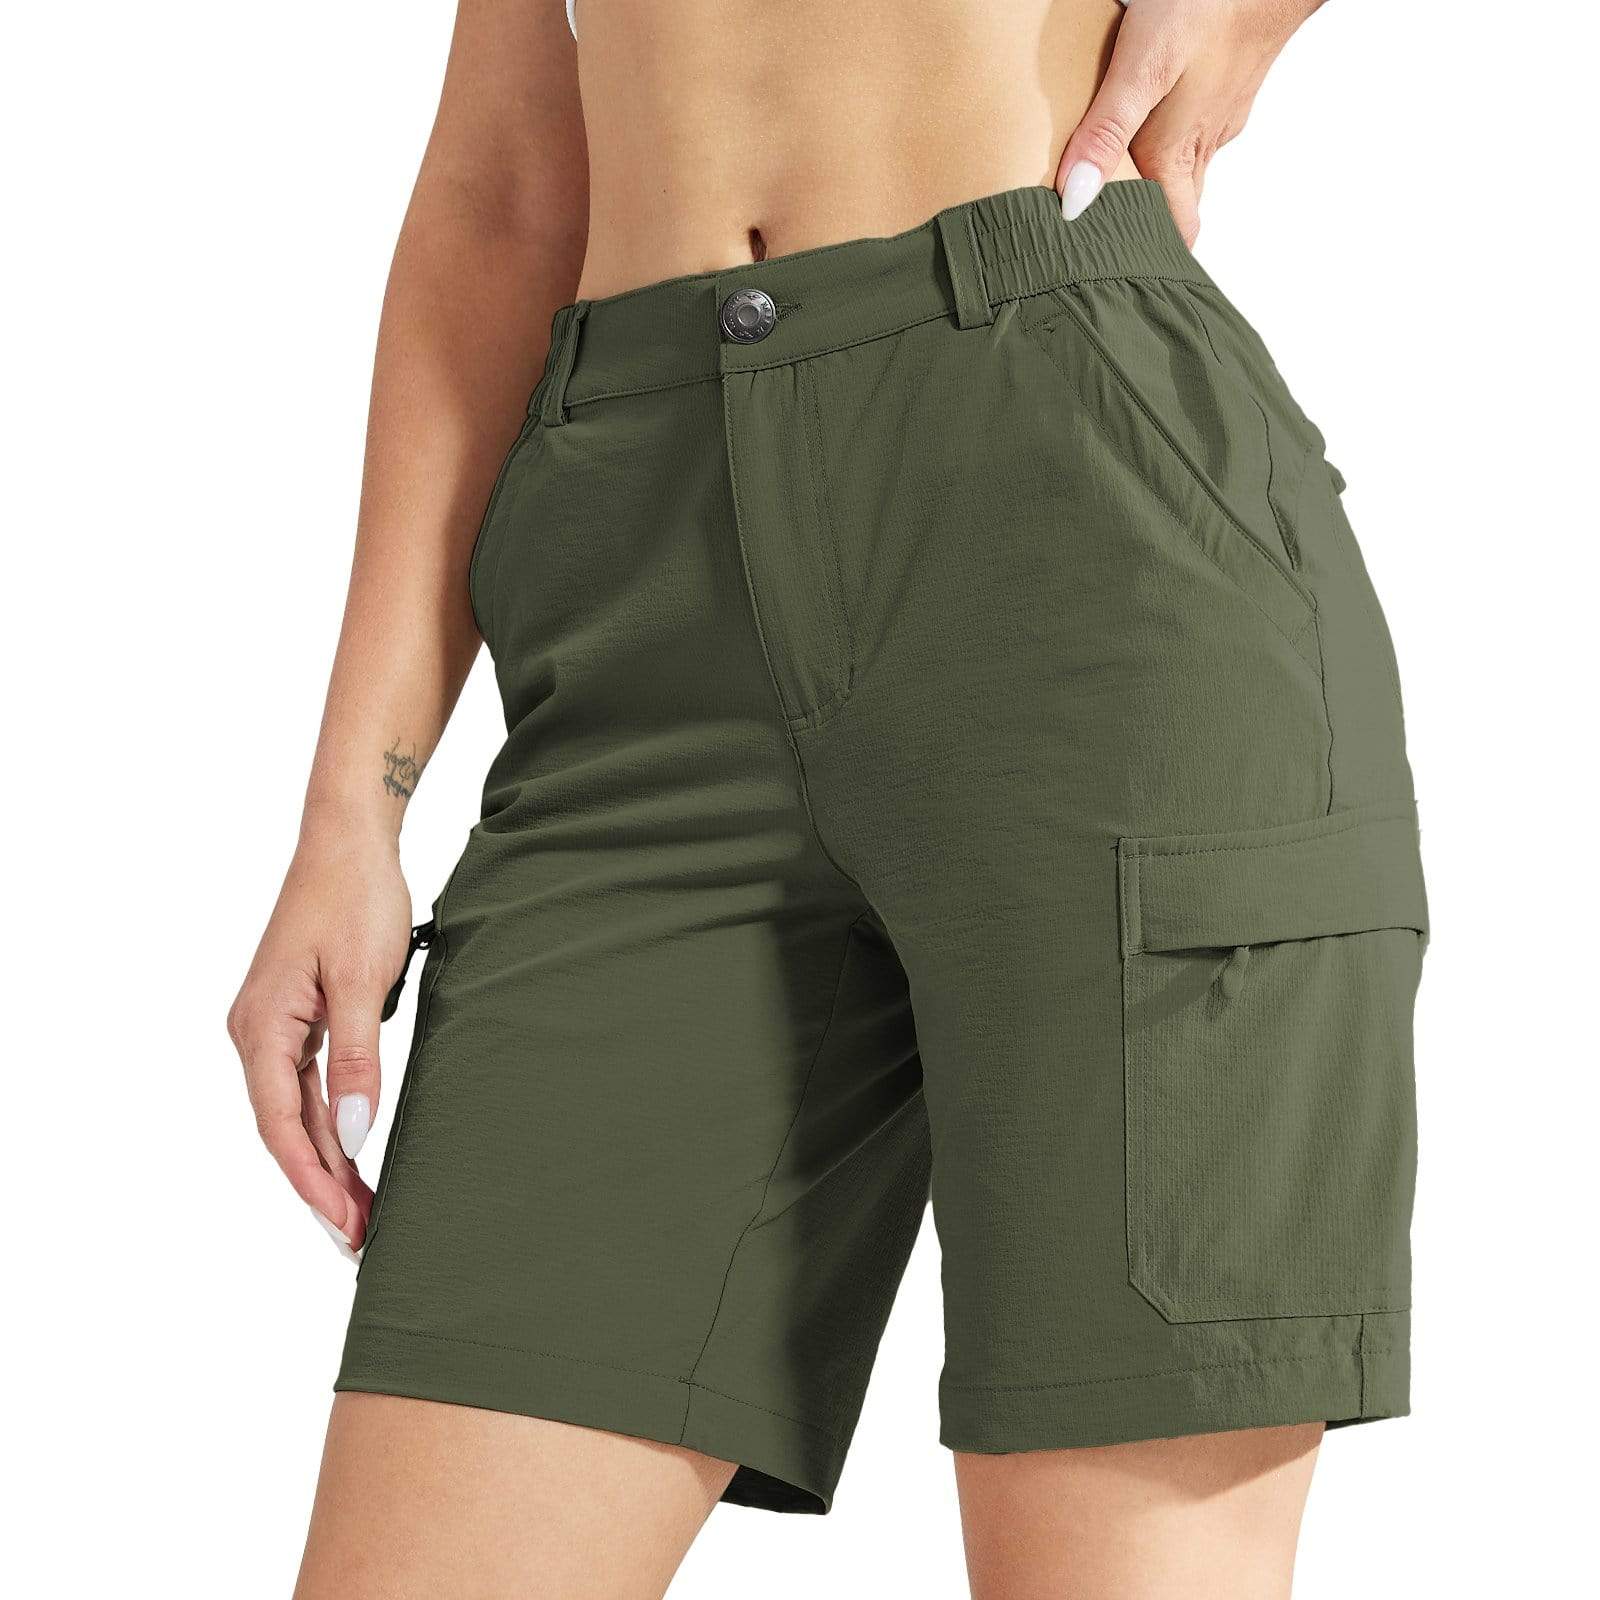 Mier Women'S Stretchy Hiking Shorts Quick Dry Cargo Shorts